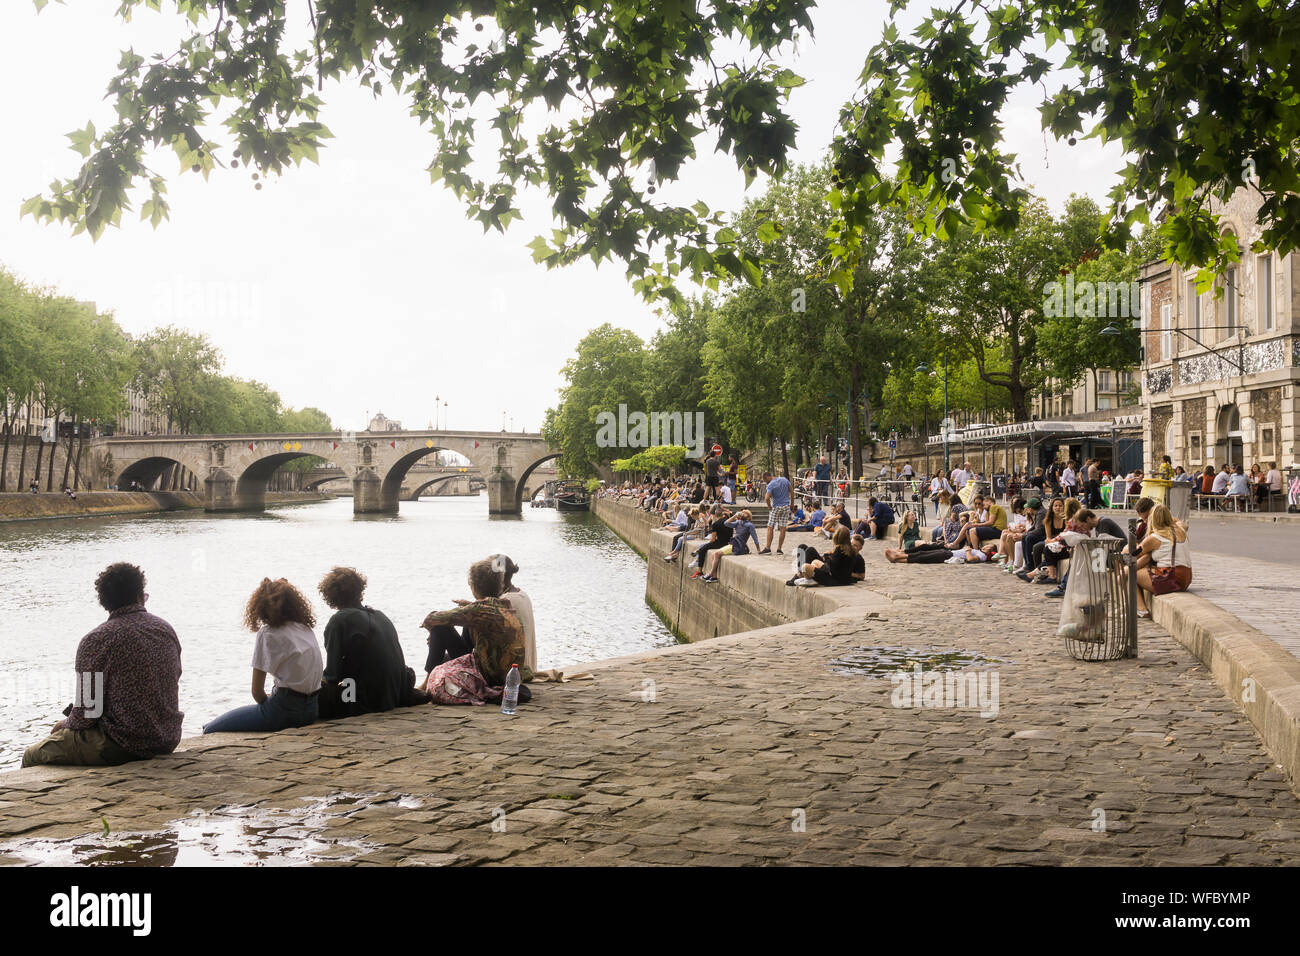 Paris riverbank - people enjoying summer on the Seine riverbank near the cafe bar Les Nautes in the 4th arrondissement of Paris, France, Europe. Stock Photo